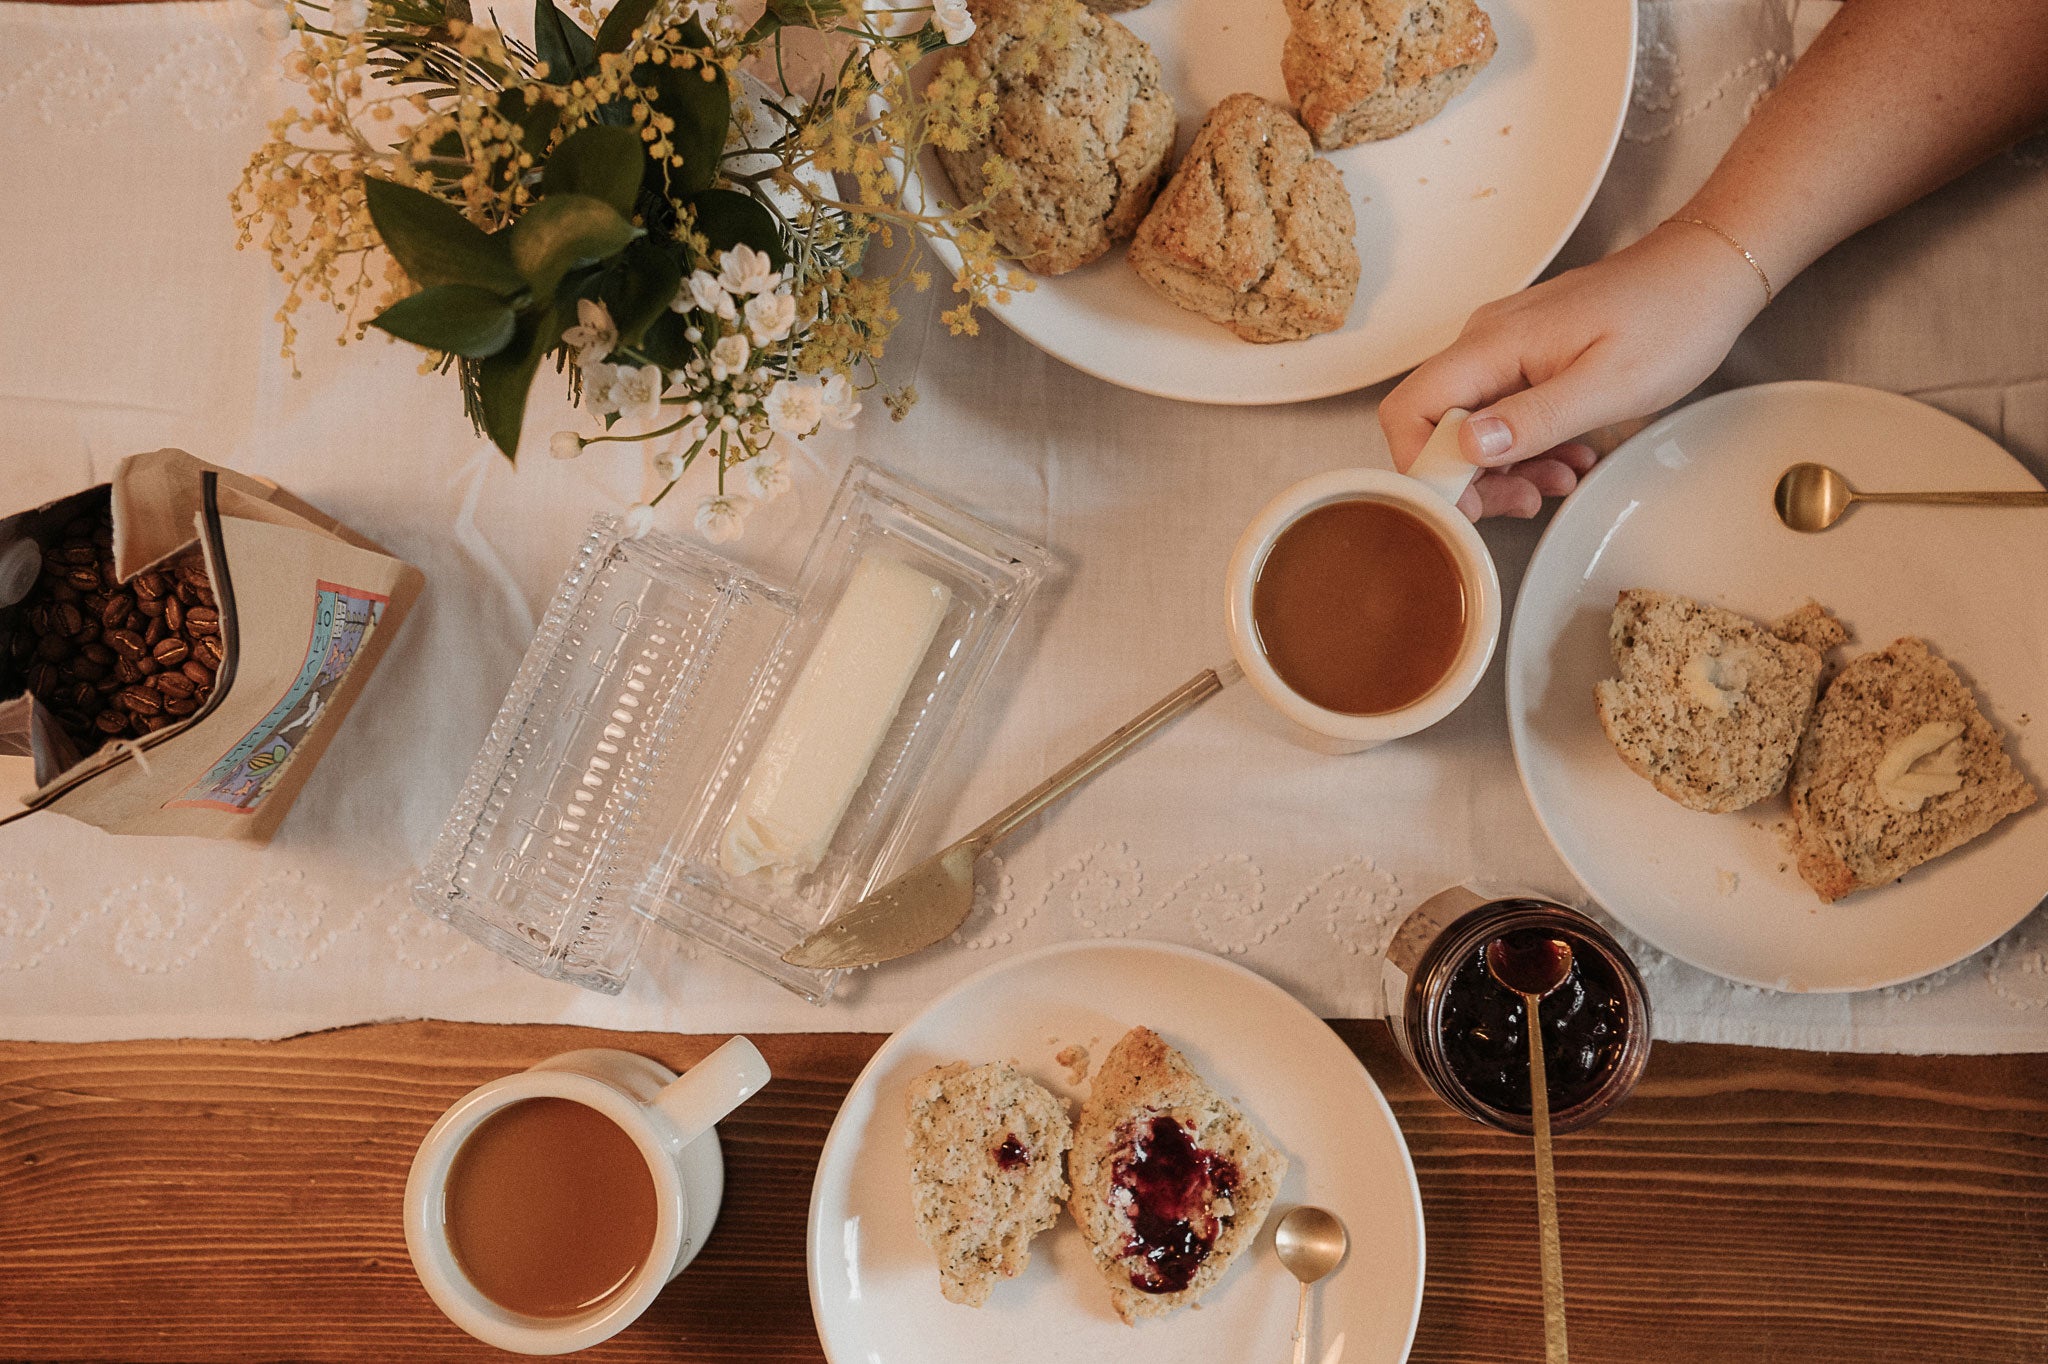 A Hygge Breakfast for Two (or "How to Trap Your Friends")